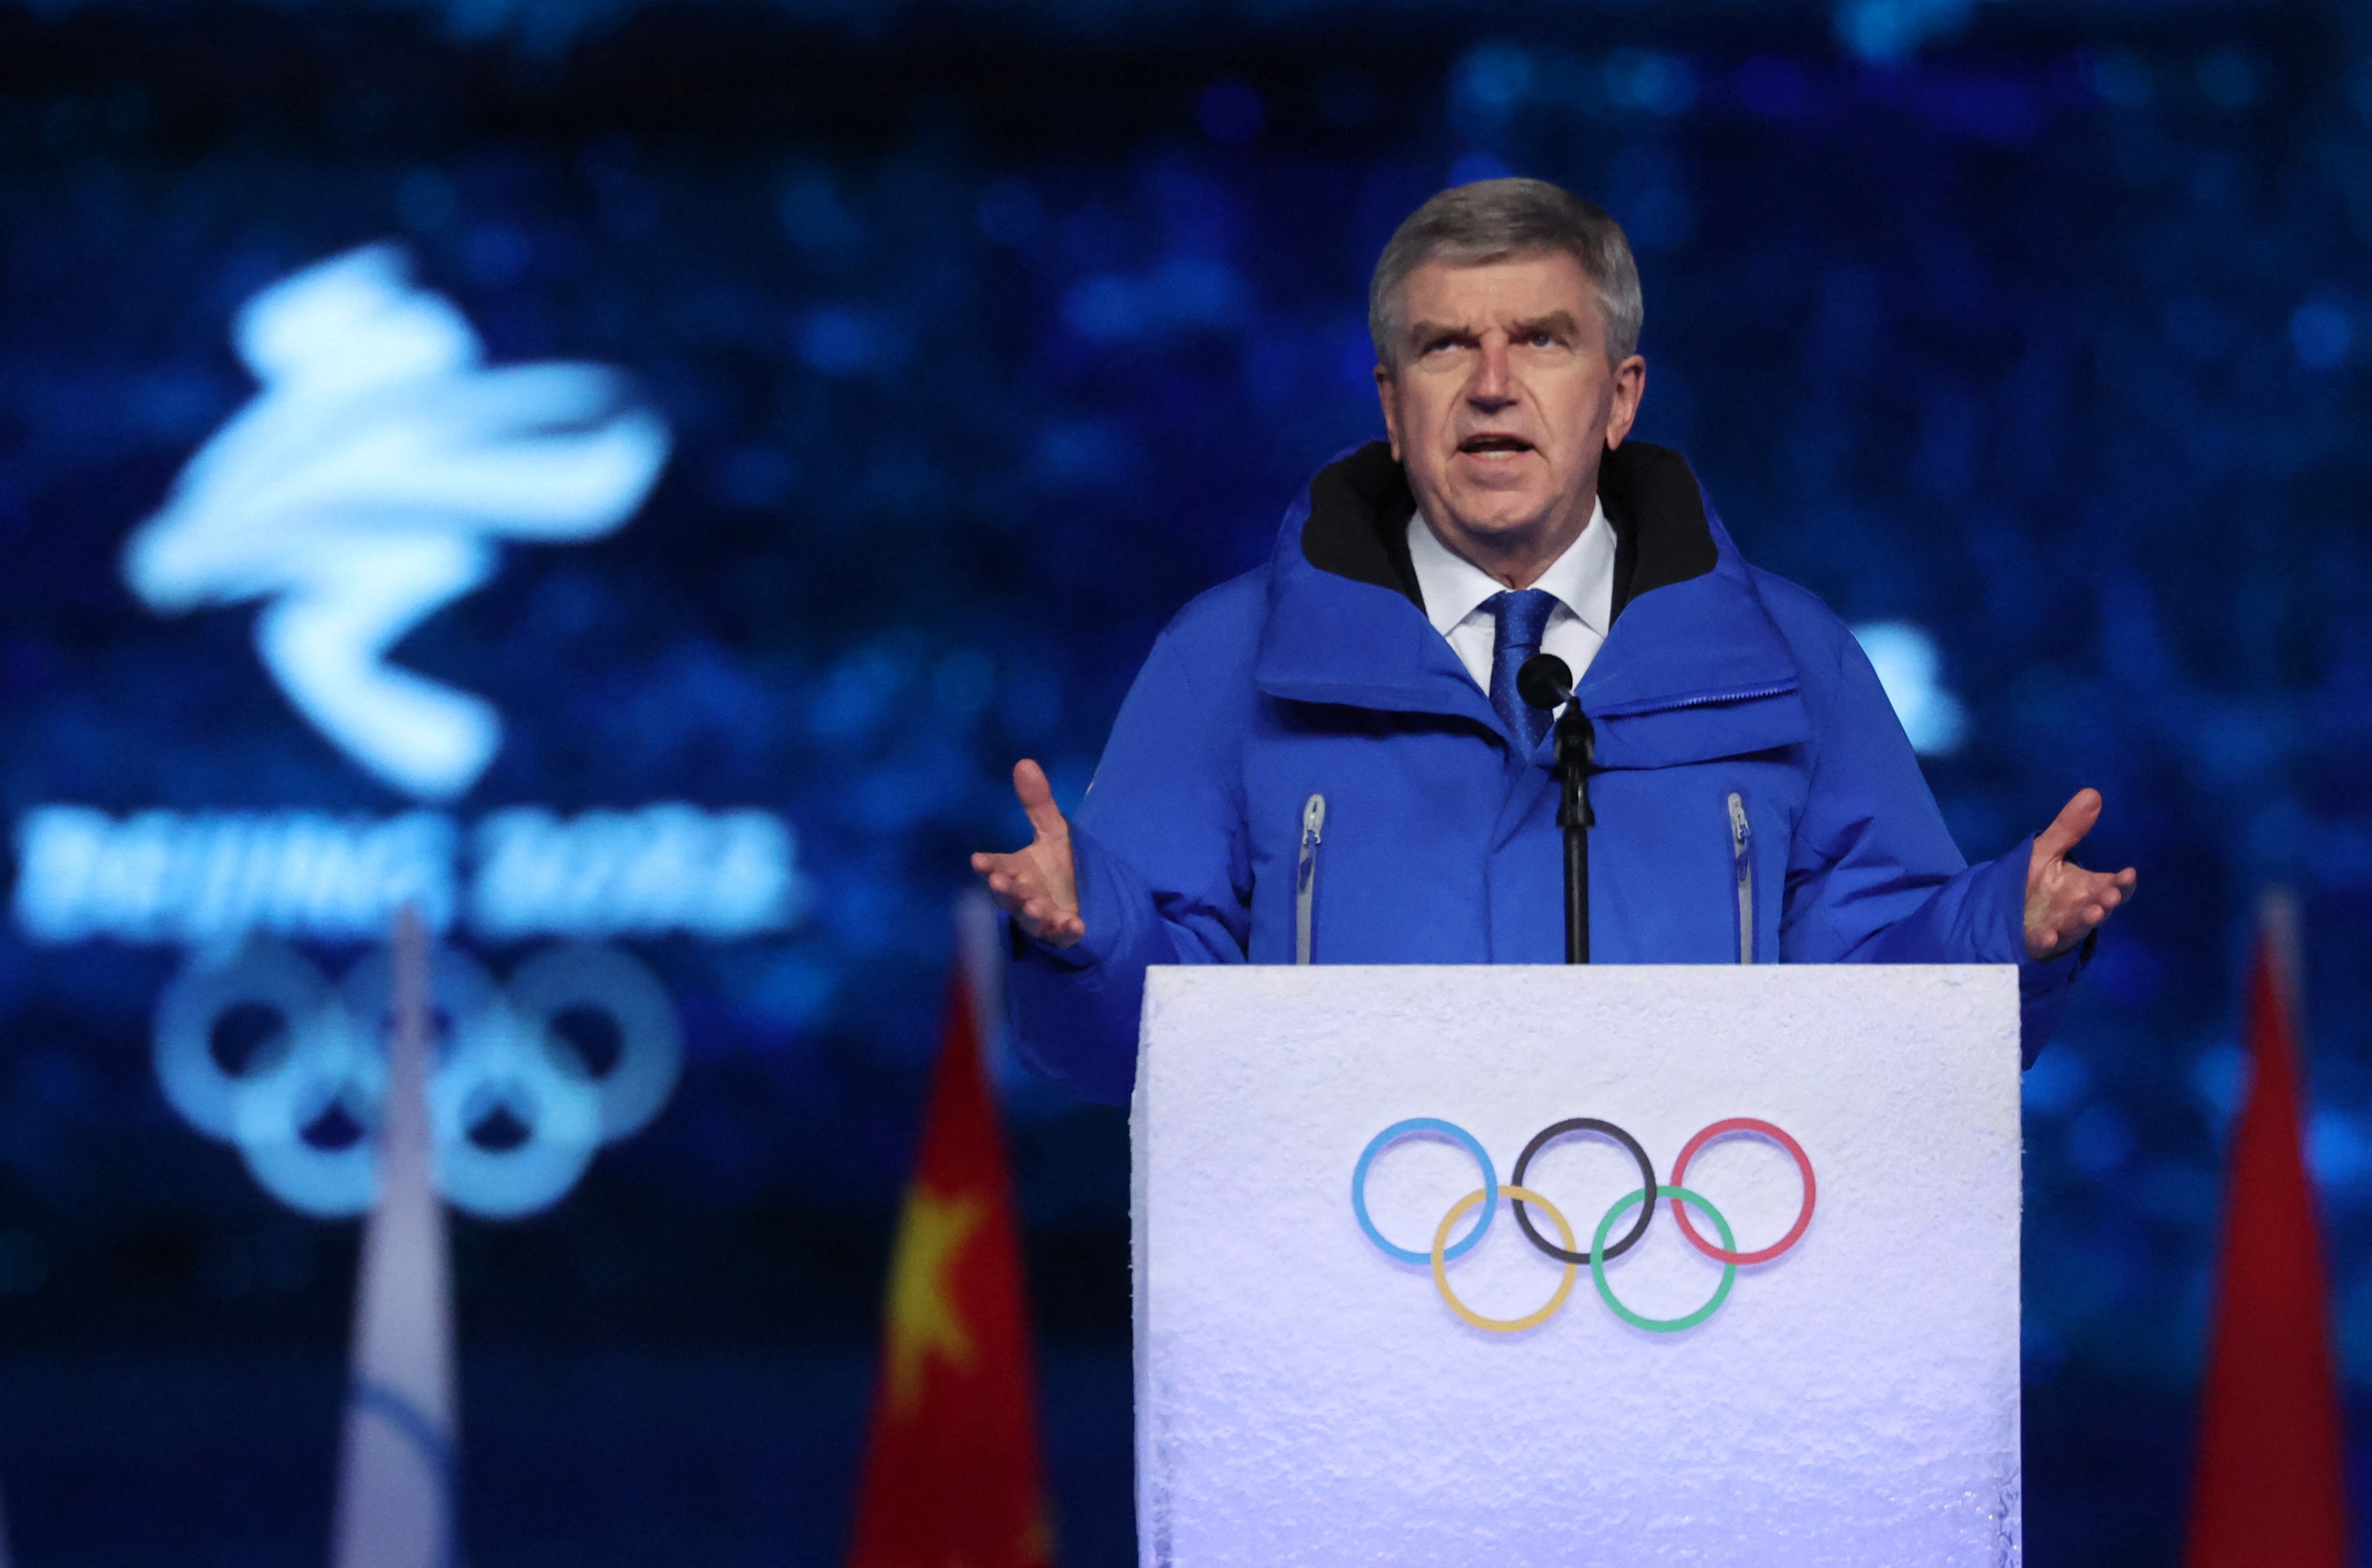 2022 Beijing Olympics - Closing Ceremony - National Stadium, Beijing, China - February 20, 2022. International Olympic Committee (IOC) President Thomas Bach gives a speech during the closing ceremony. REUTERS/Phil Noble